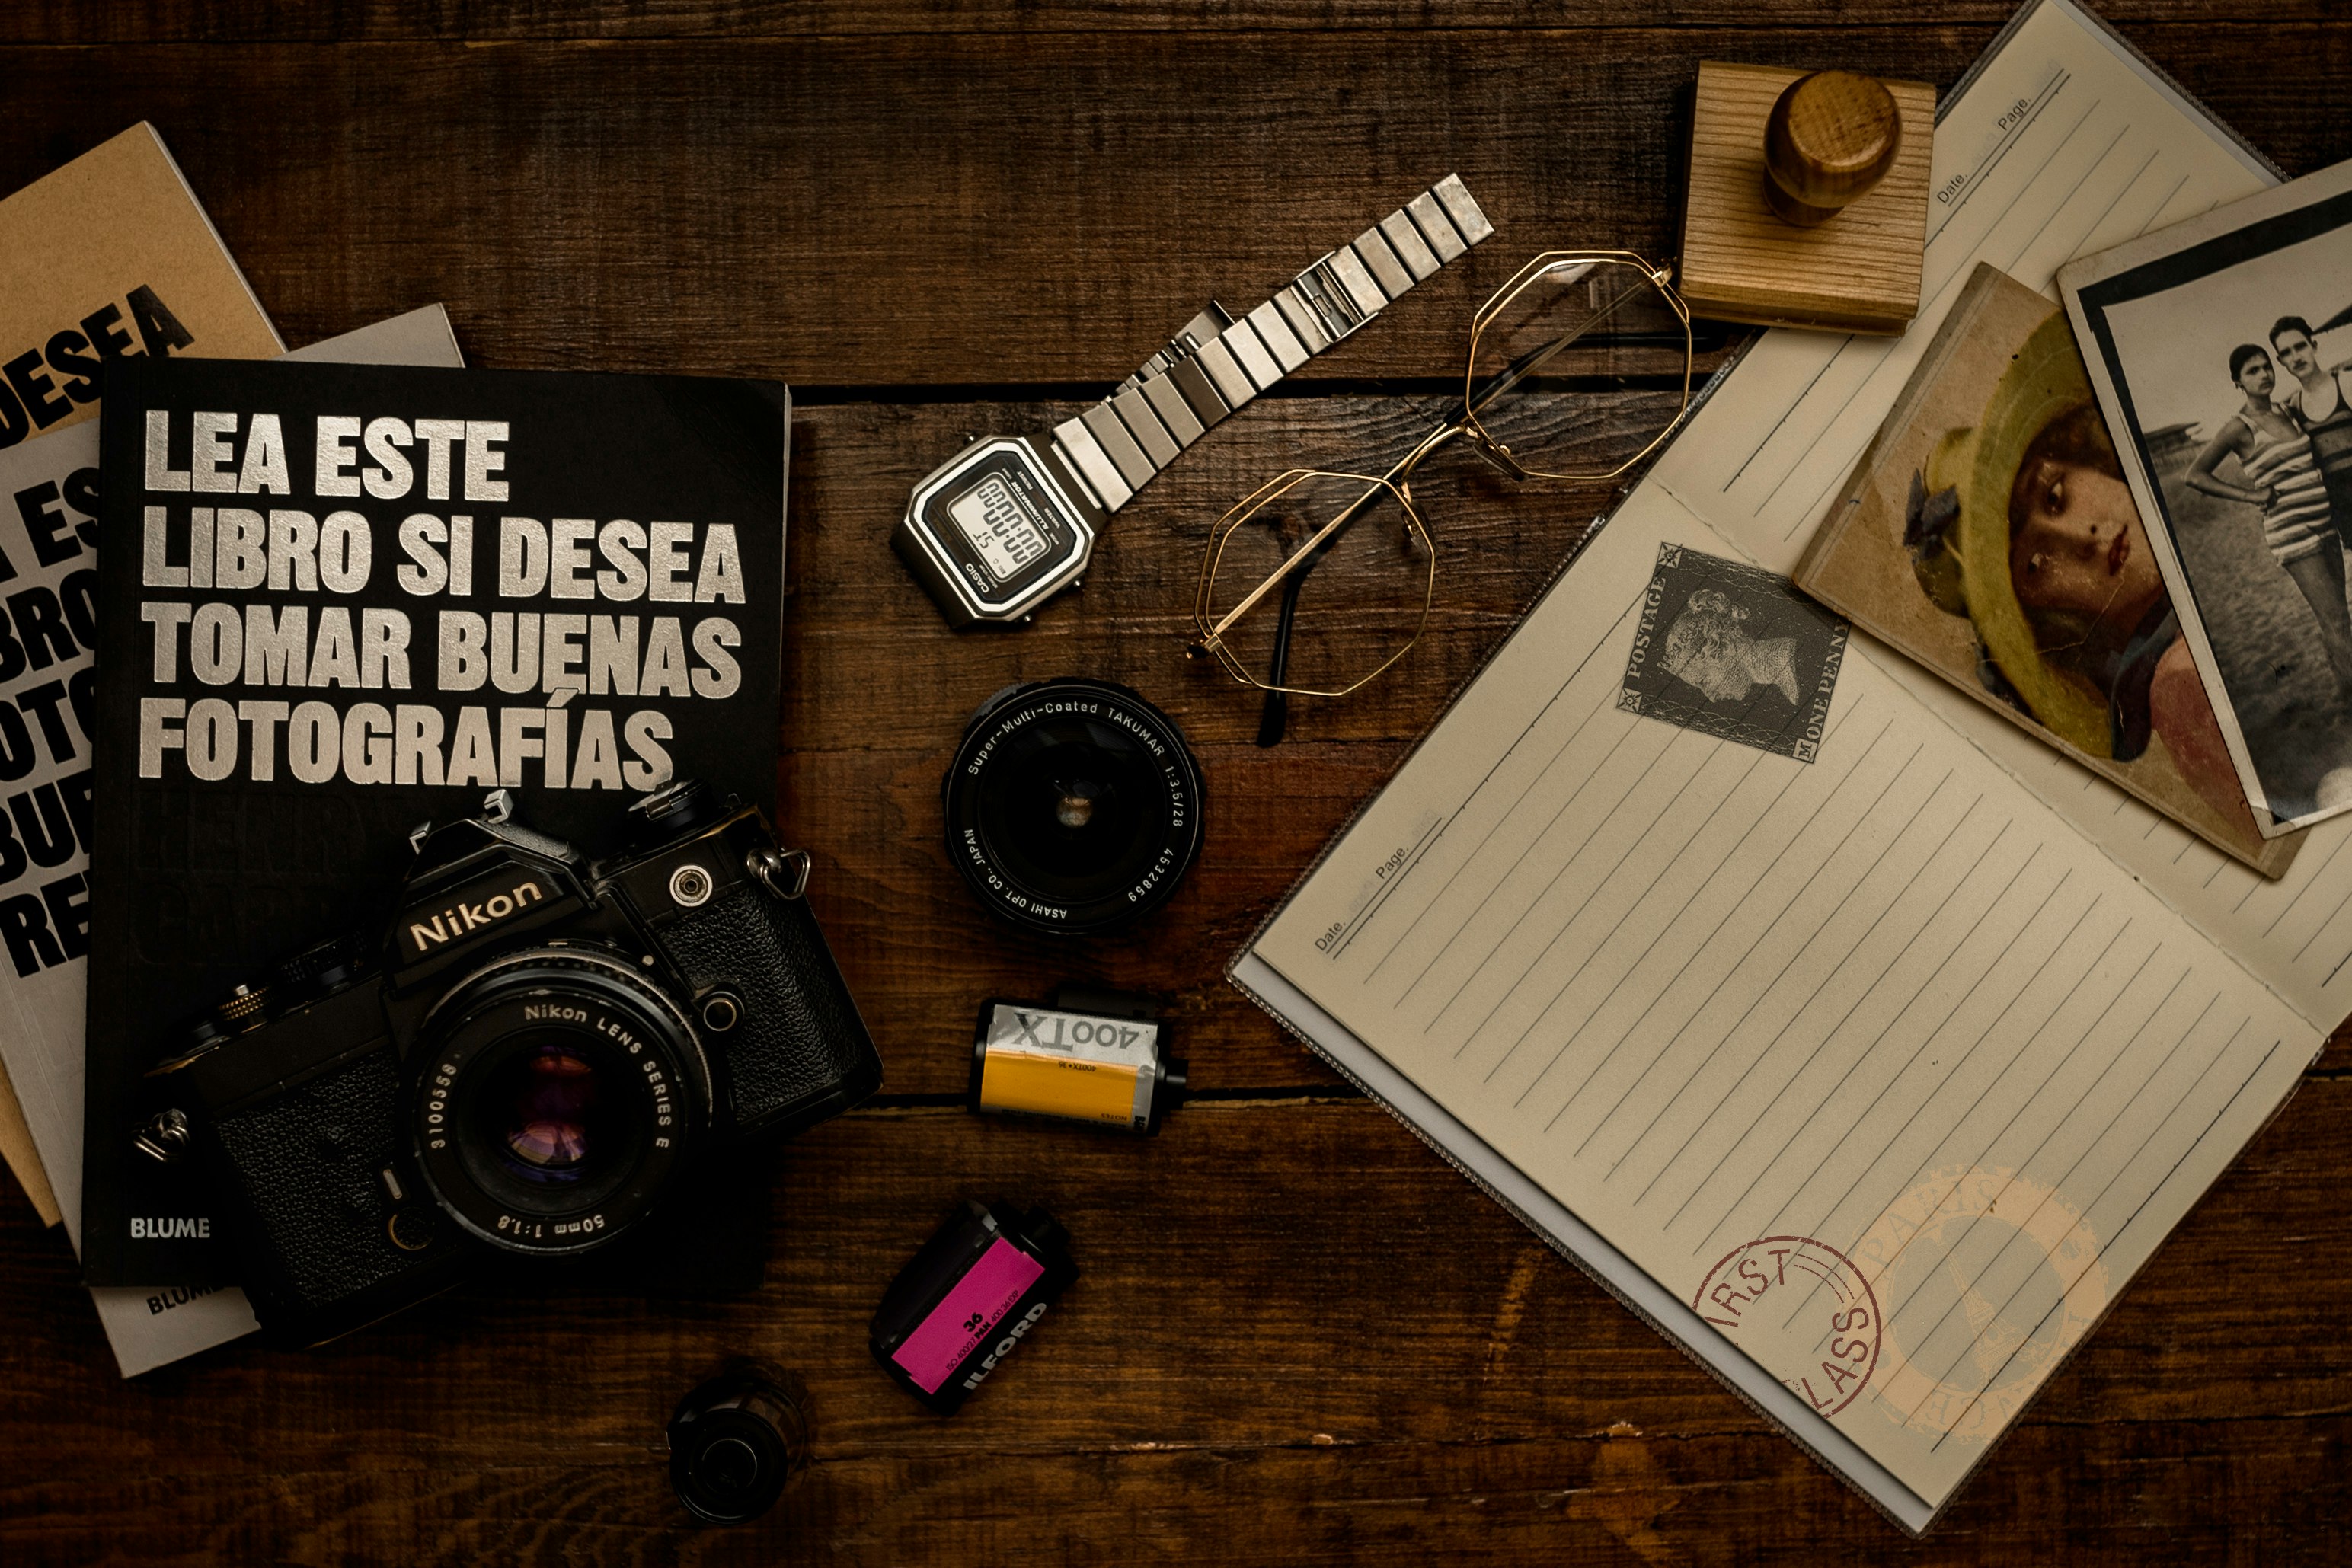 black and silver dslr camera beside white ruled paper on brown wooden table